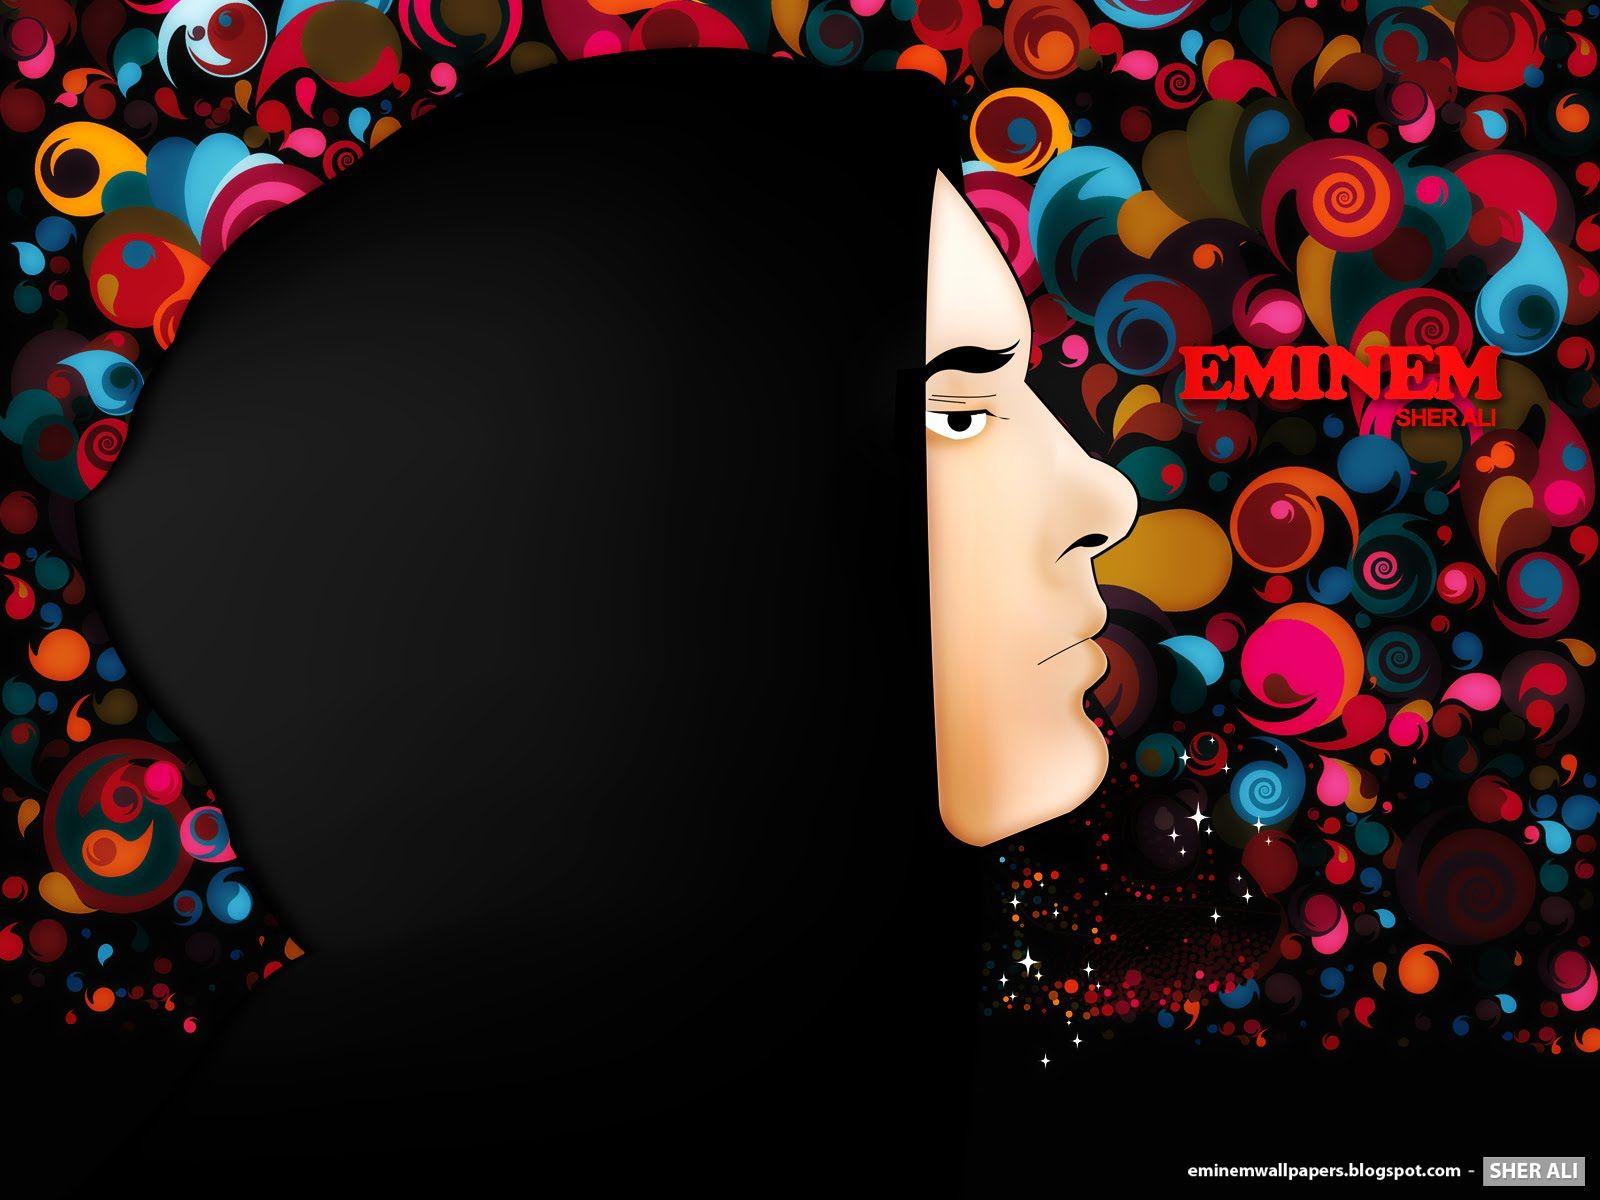 EMINEM WALLPAPERS: EMINEM WALLPAPERS EXCLUSIVE ILLUSTRATED